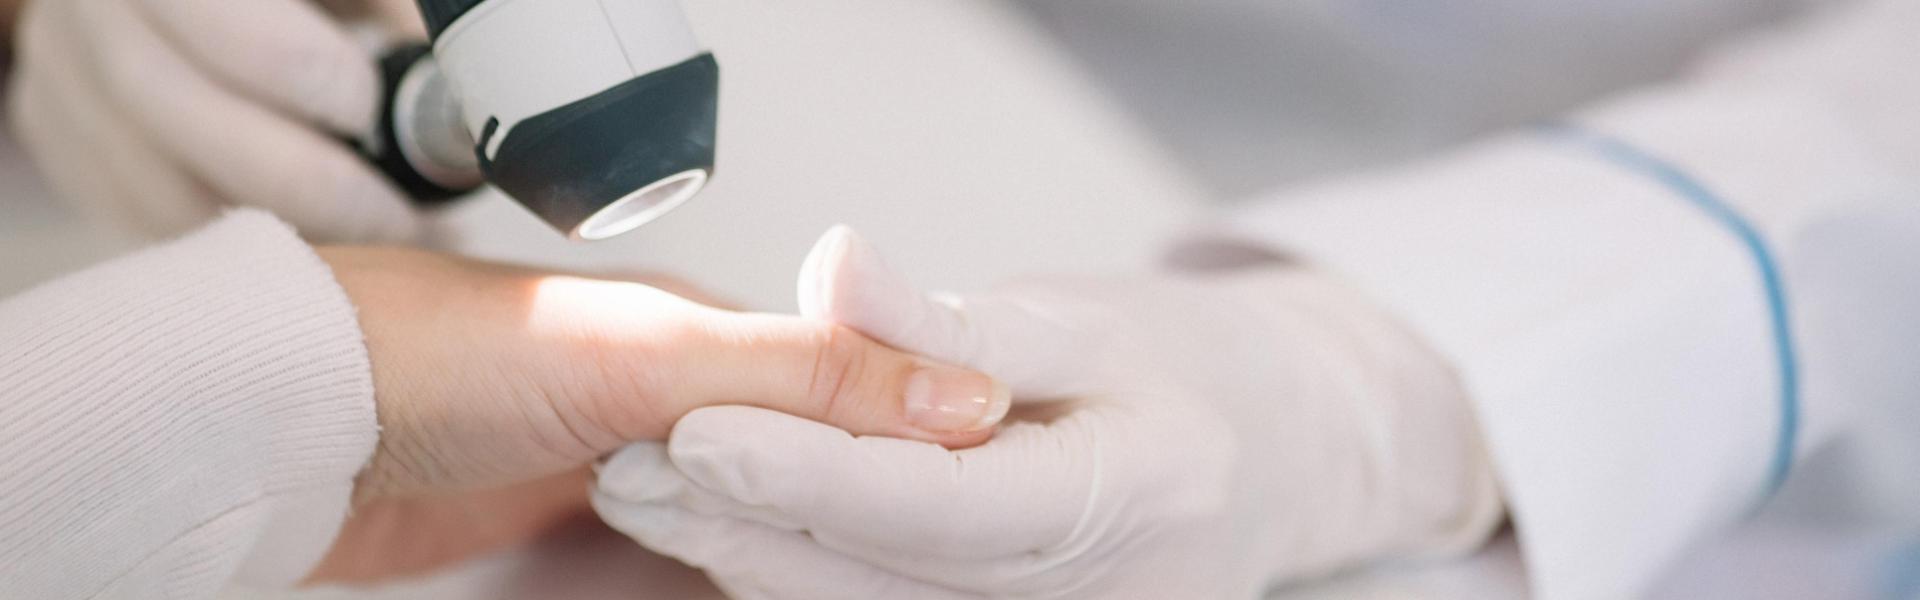 A dermatologist examining a patients hand